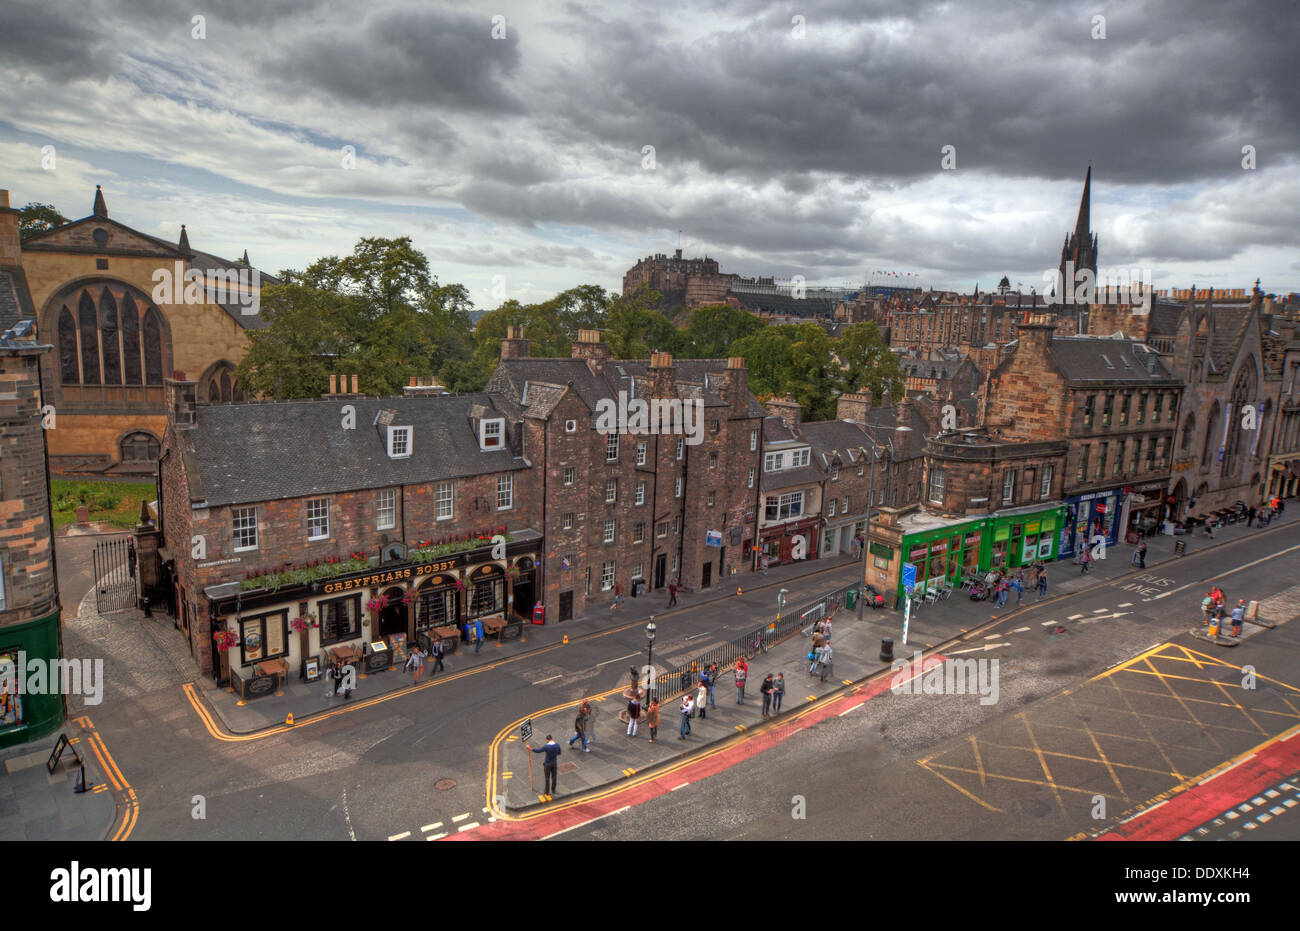 Edinburghs Grey Friars, Tolbooth, George Street and Candlemaker Row, city centre, Lothians, Scotland, UK, under moody skies Stock Photo